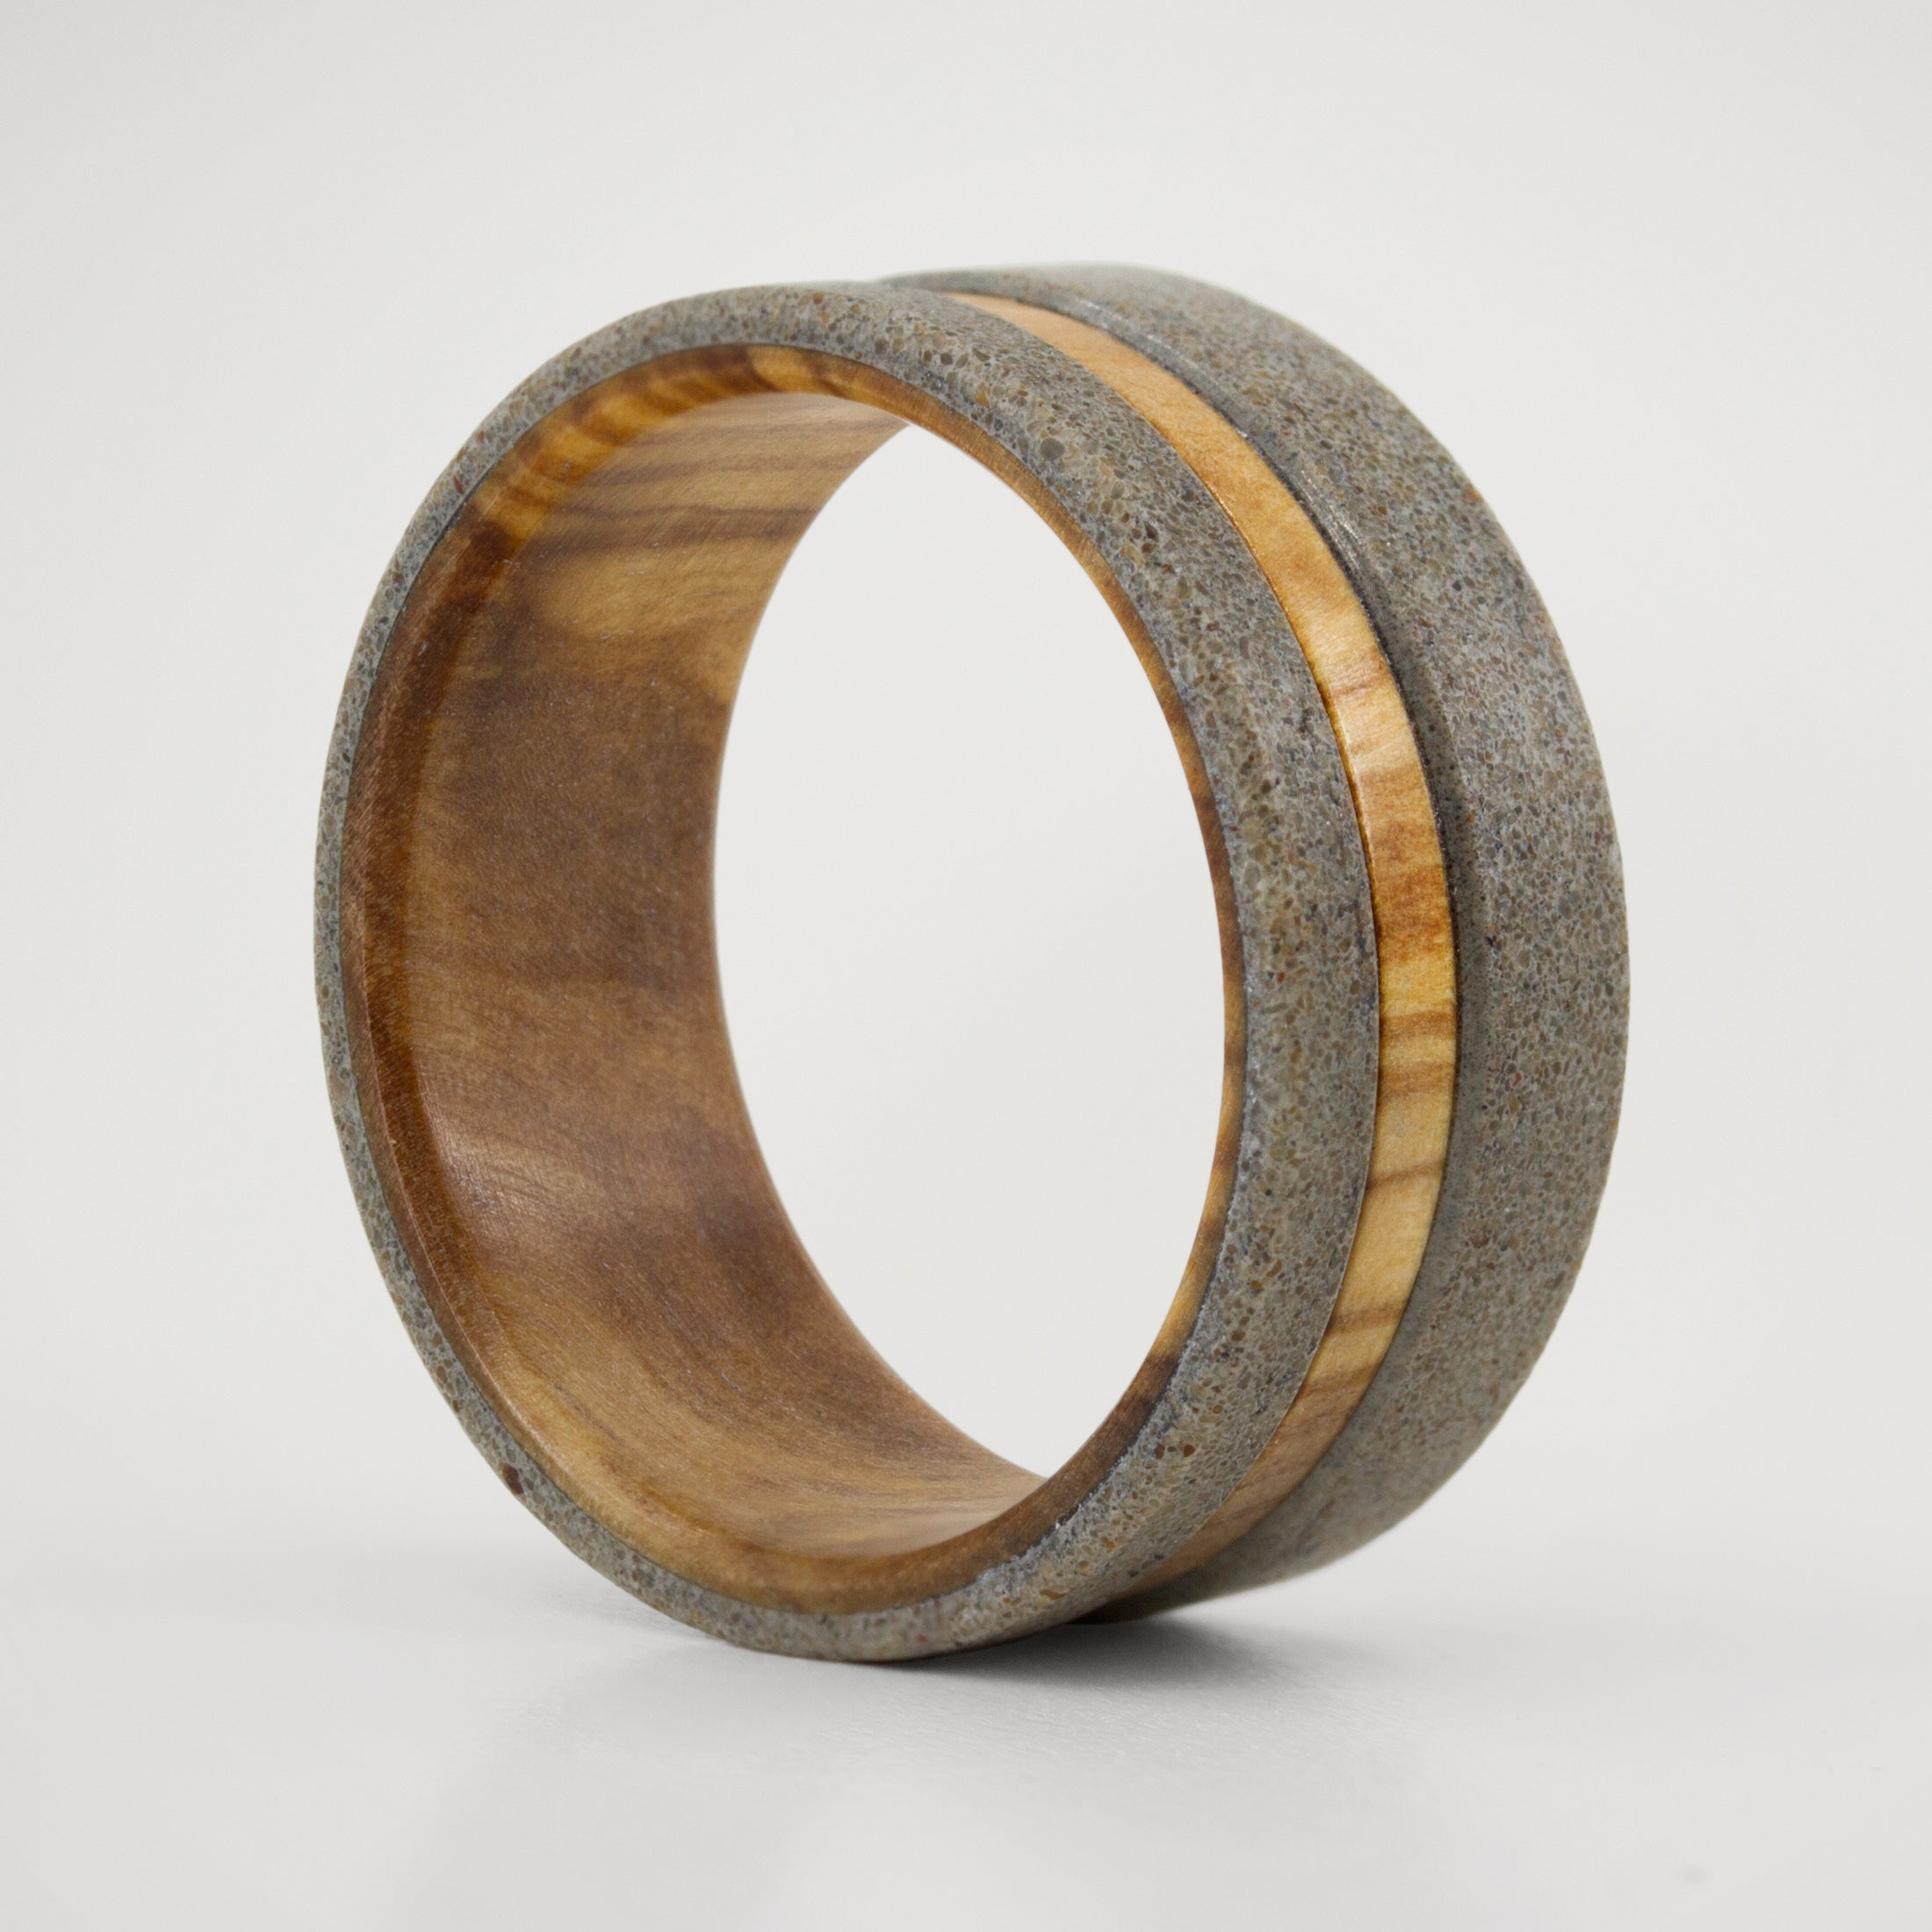 Gray concrete & olive wood ring